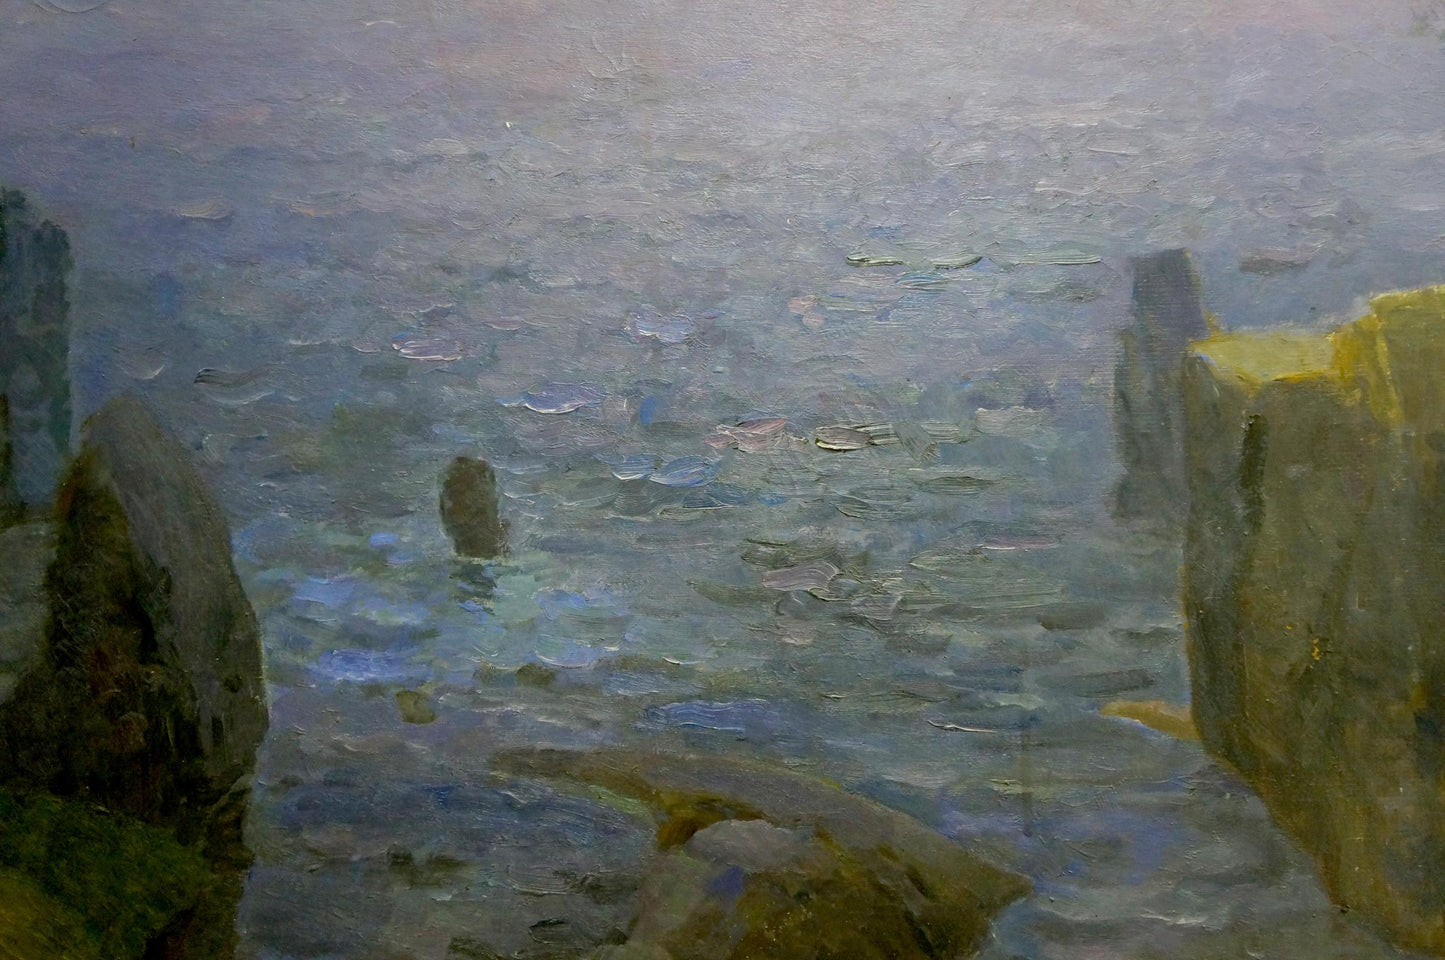 Lonely Sea depicted through oil painting